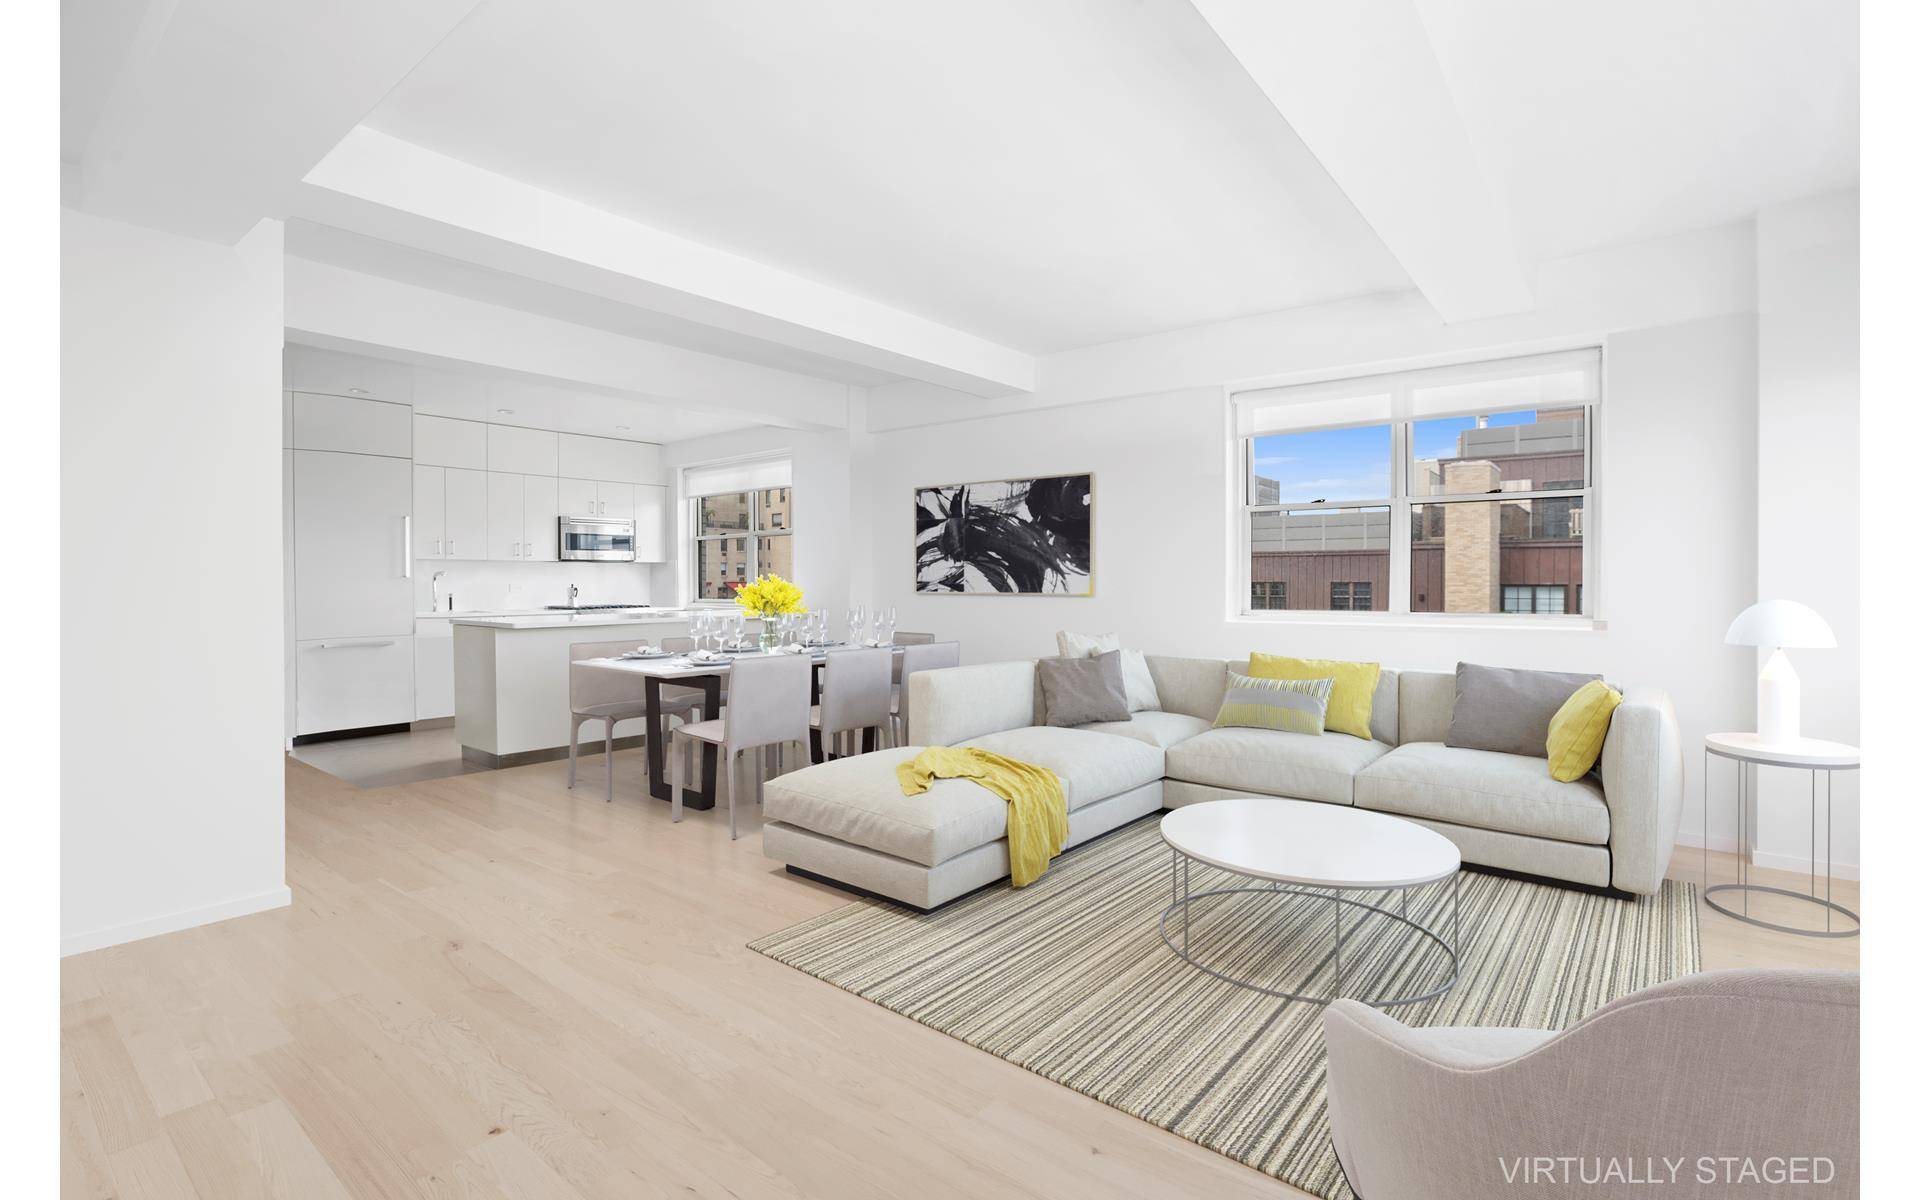 Light and spacious two bedroom plus office in a corner unit with views of landmarks on the Upper East side.